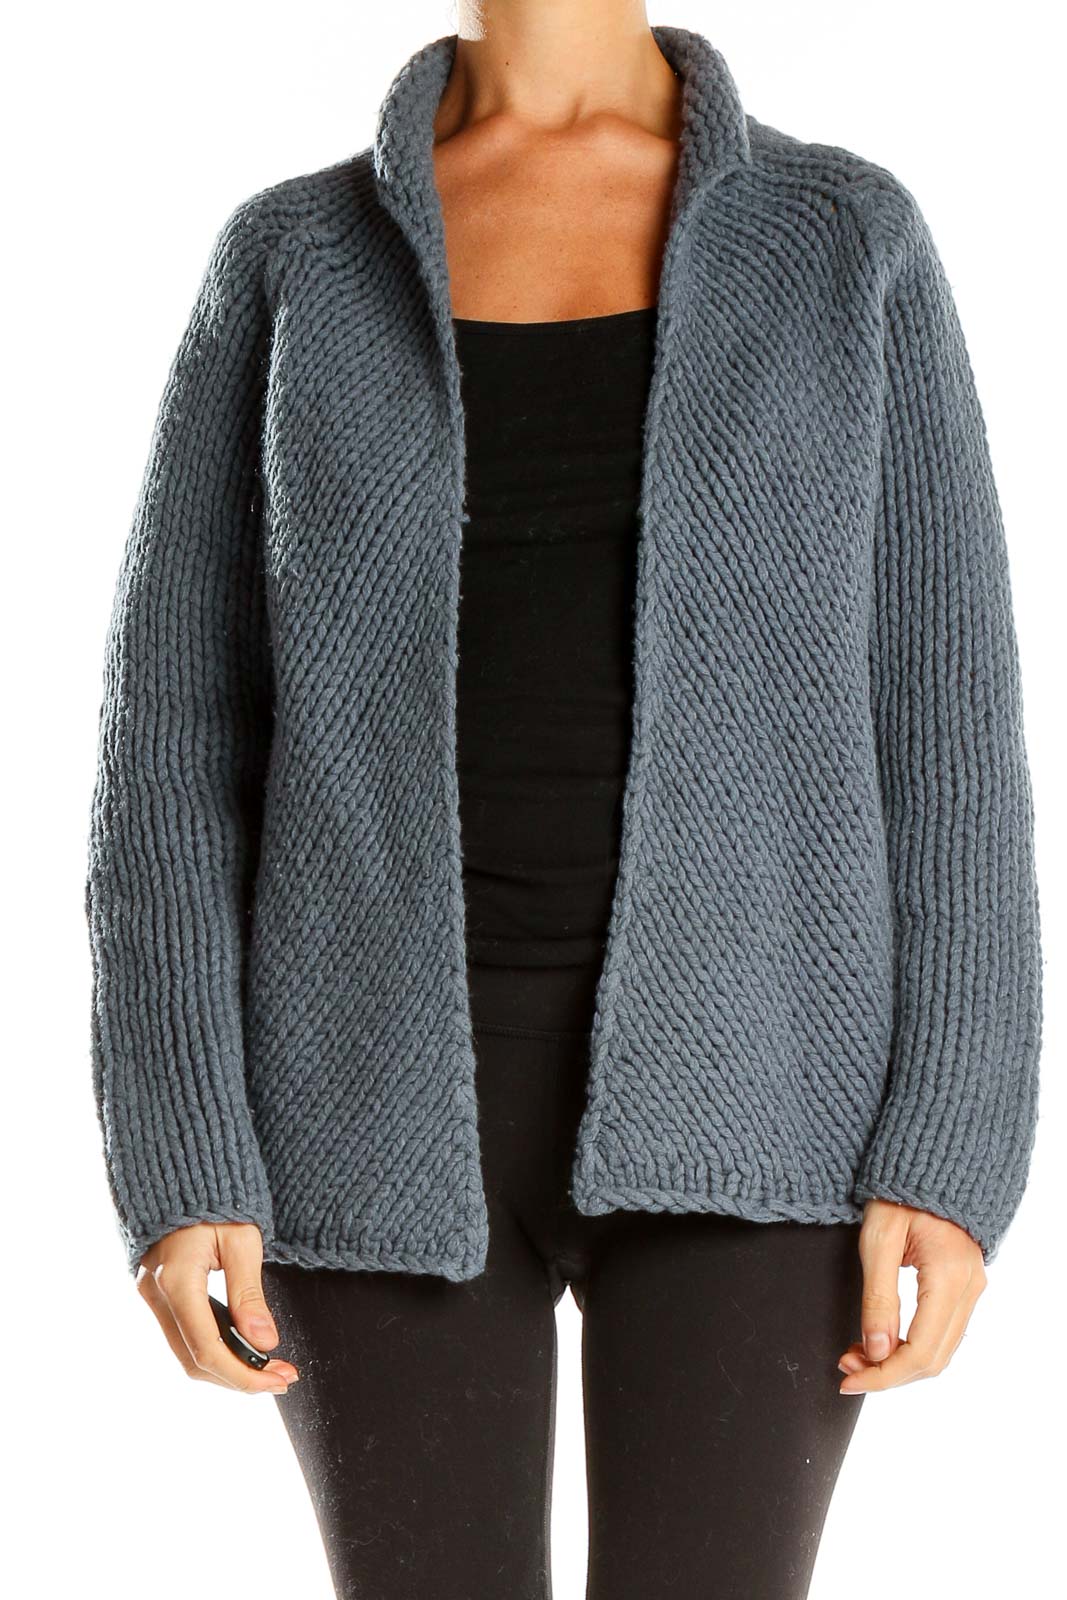 Gray Knitted Cardigan Front